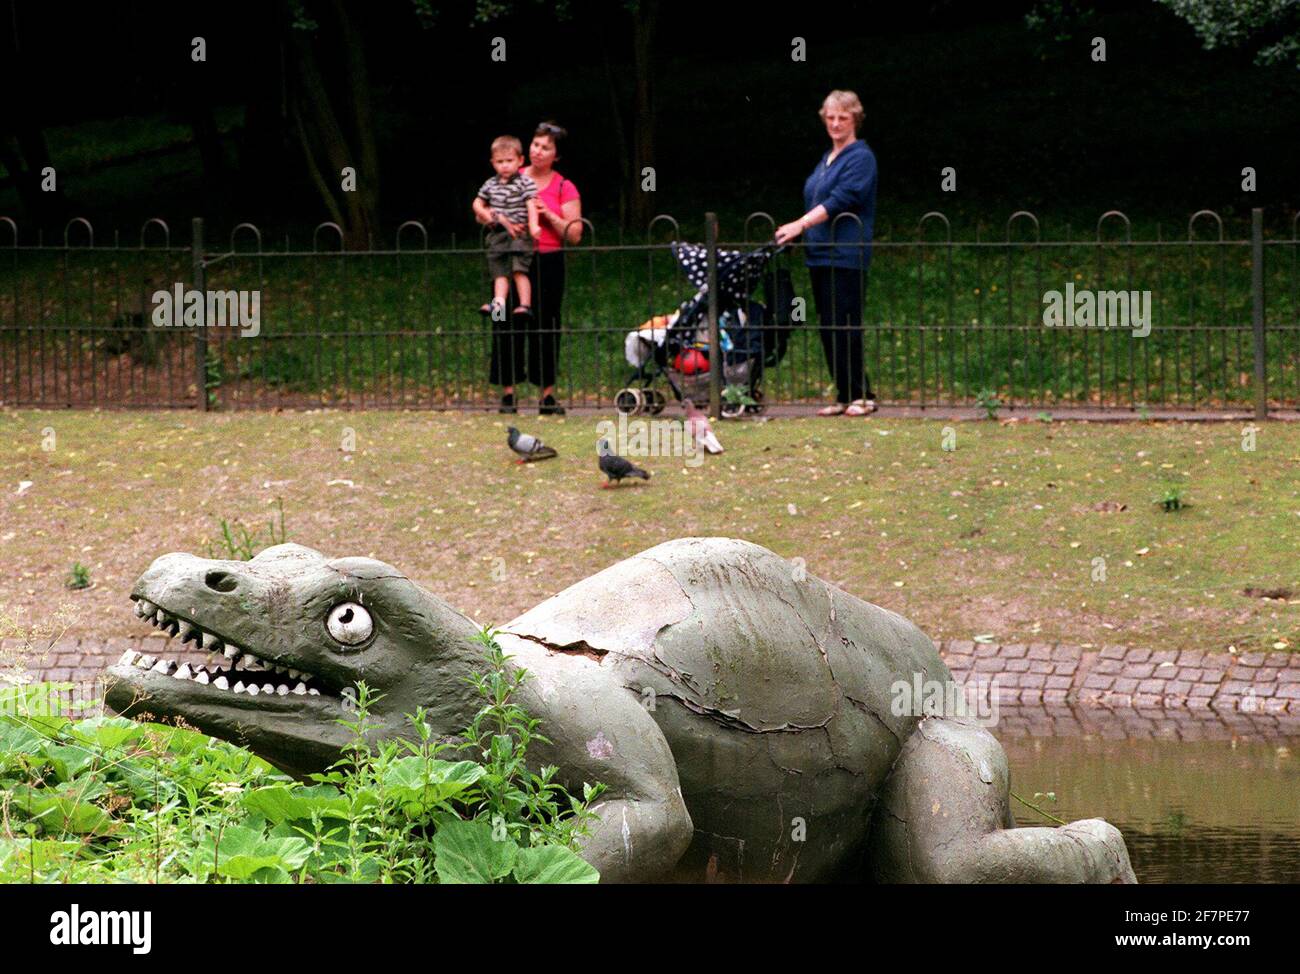 Dinosaur Statues in Crystal Palace Park Pond June 2000 Stock Photo